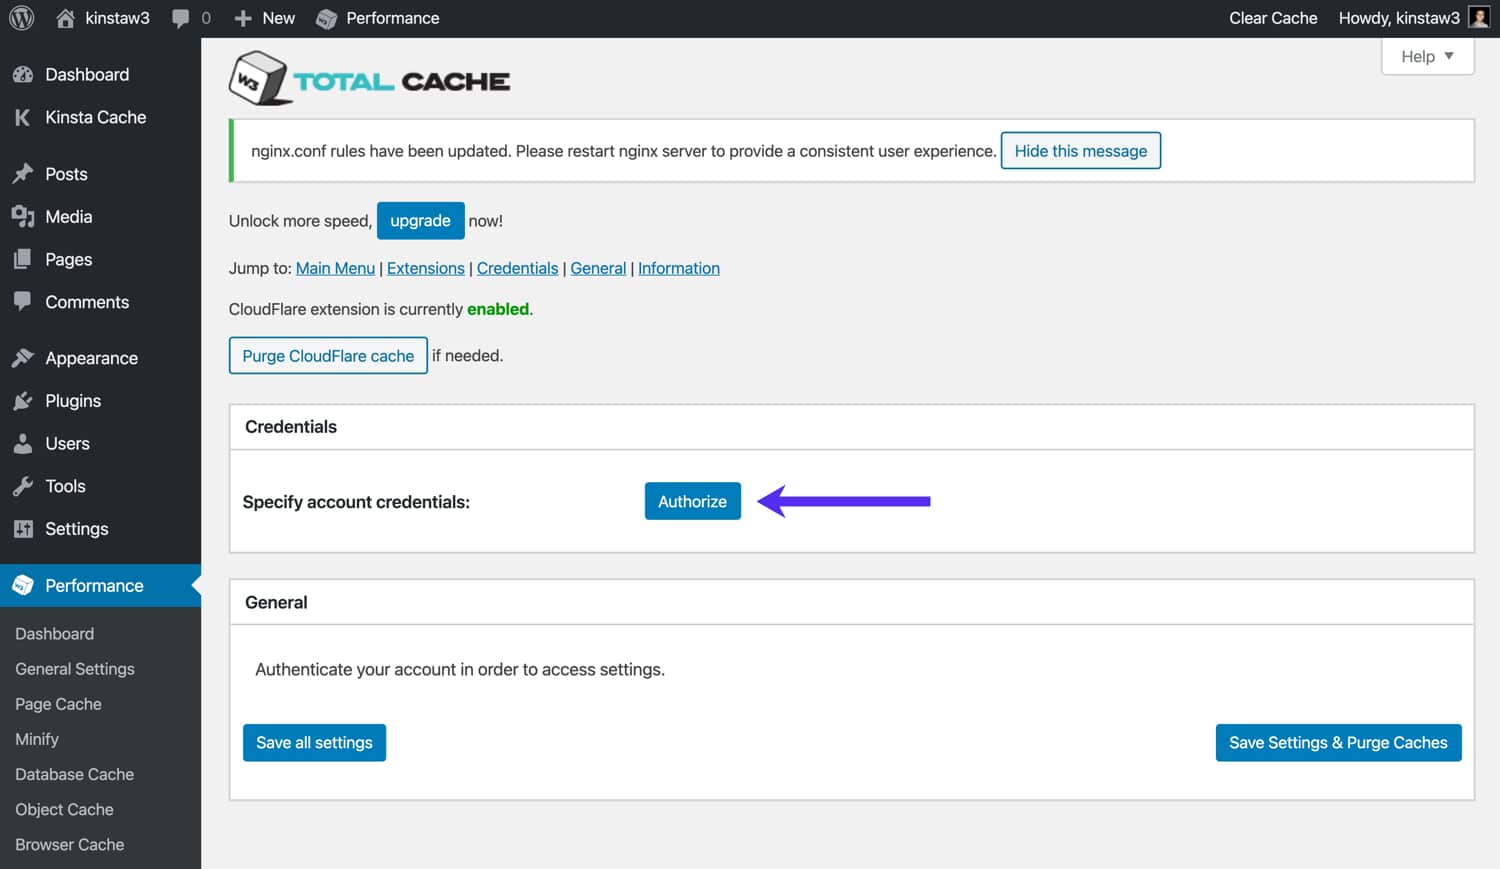 How to Configure W3 Total Cache Settings for Your WordPress Site